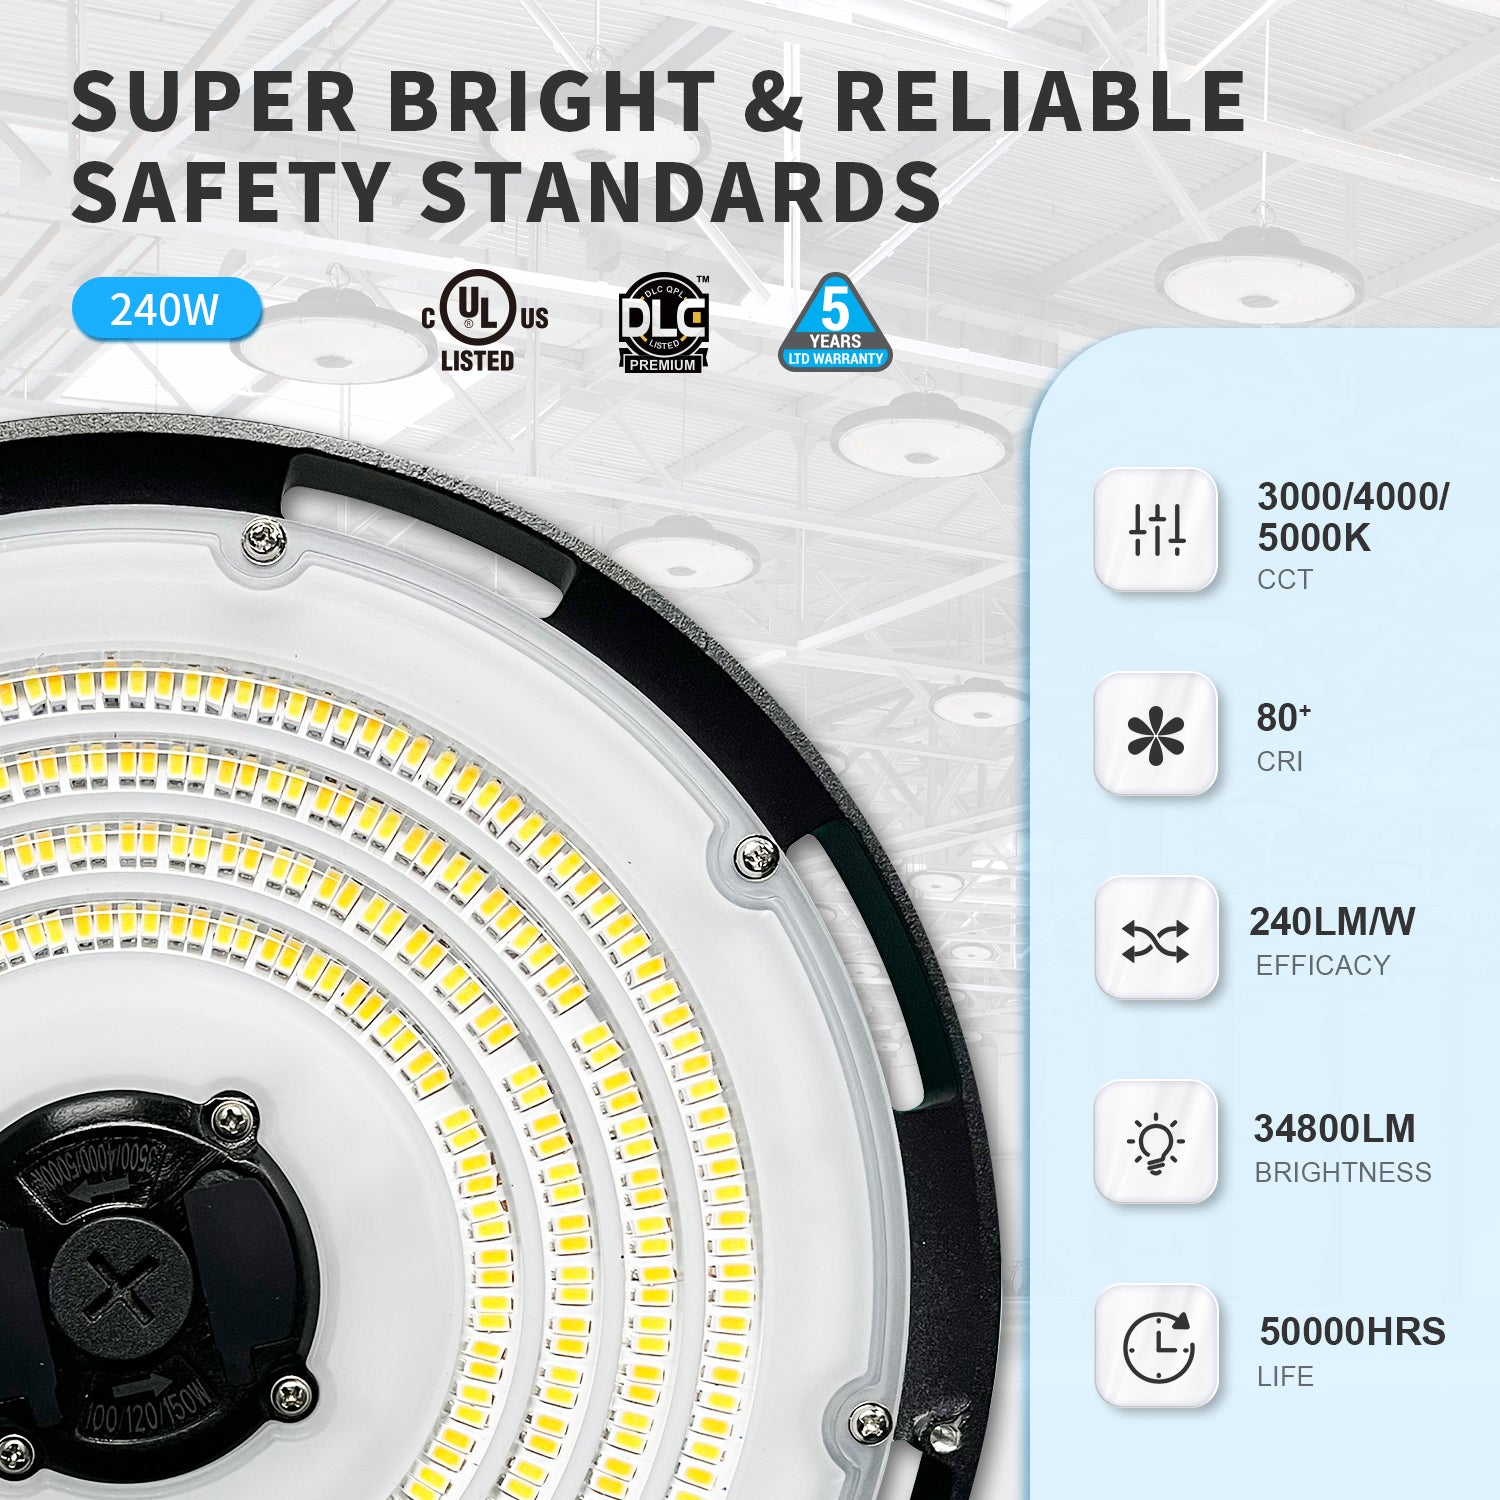 UFO lighting fixtures,240LM/W,34800LM,50000hrs life